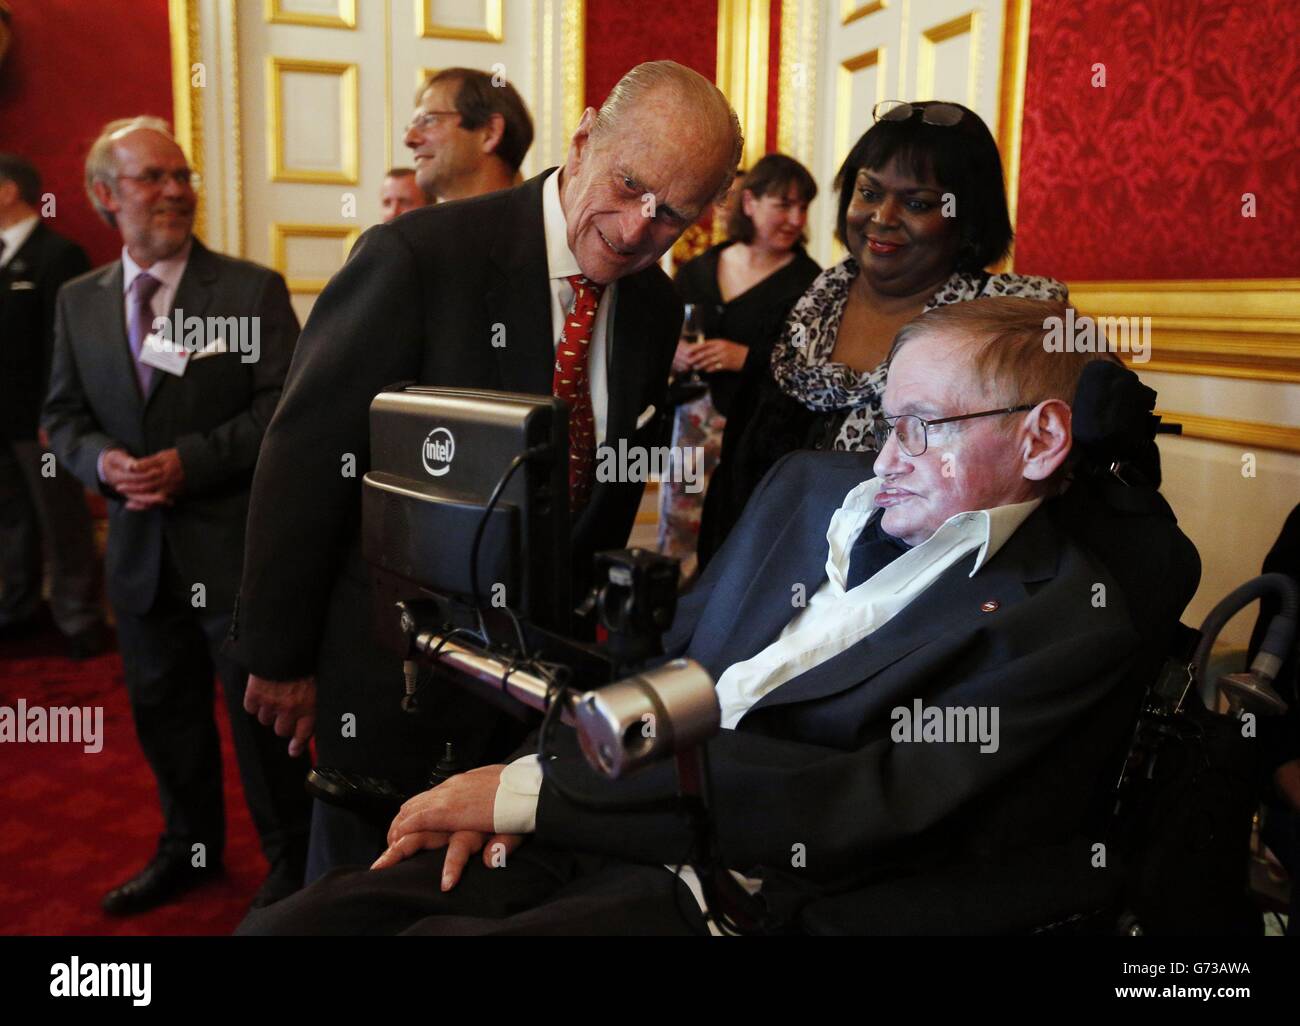 The Duke of Edinburgh greets Professor Stephen Hawking during a reception for Leonard Cheshire Disability in the State Rooms, St James's Palace, London. Stock Photo